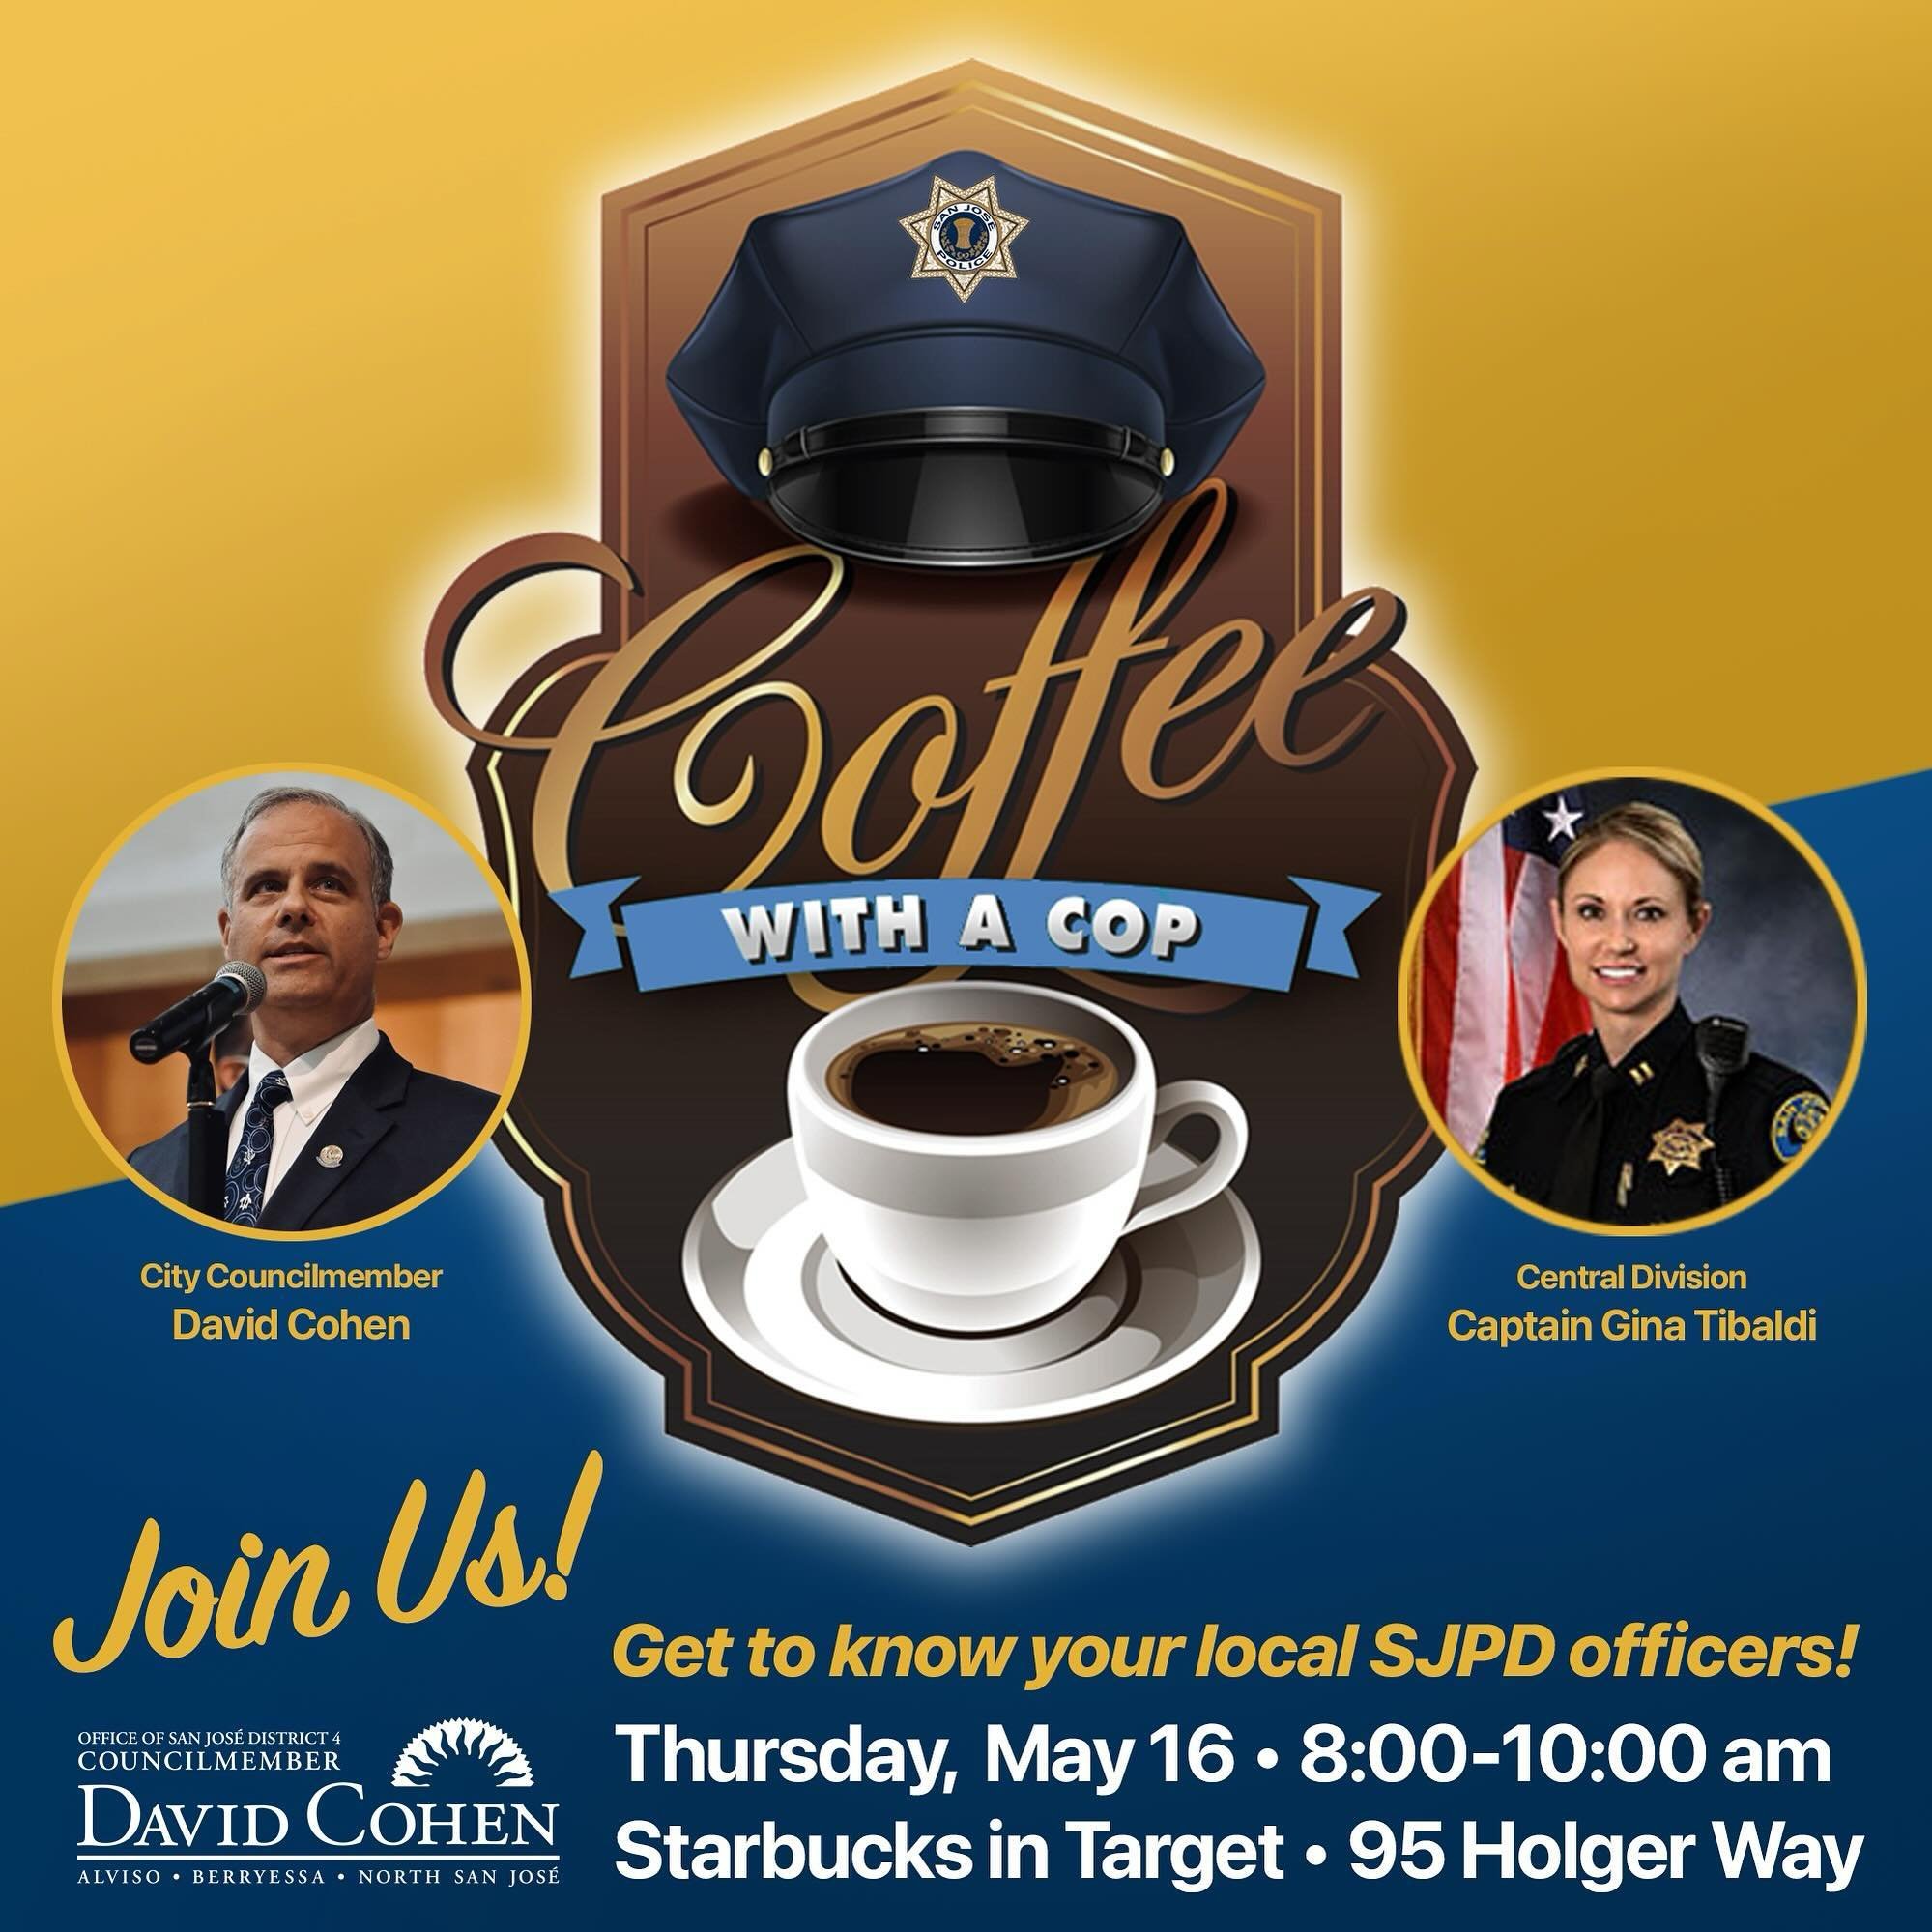 Join me and members of SJPD Thursday morning at the Starbucks inside Target on Holger Way for Coffee With A Cop! It&rsquo;s a great opportunity to get to know your local police officers. We&rsquo;ll be there from 8-10am.